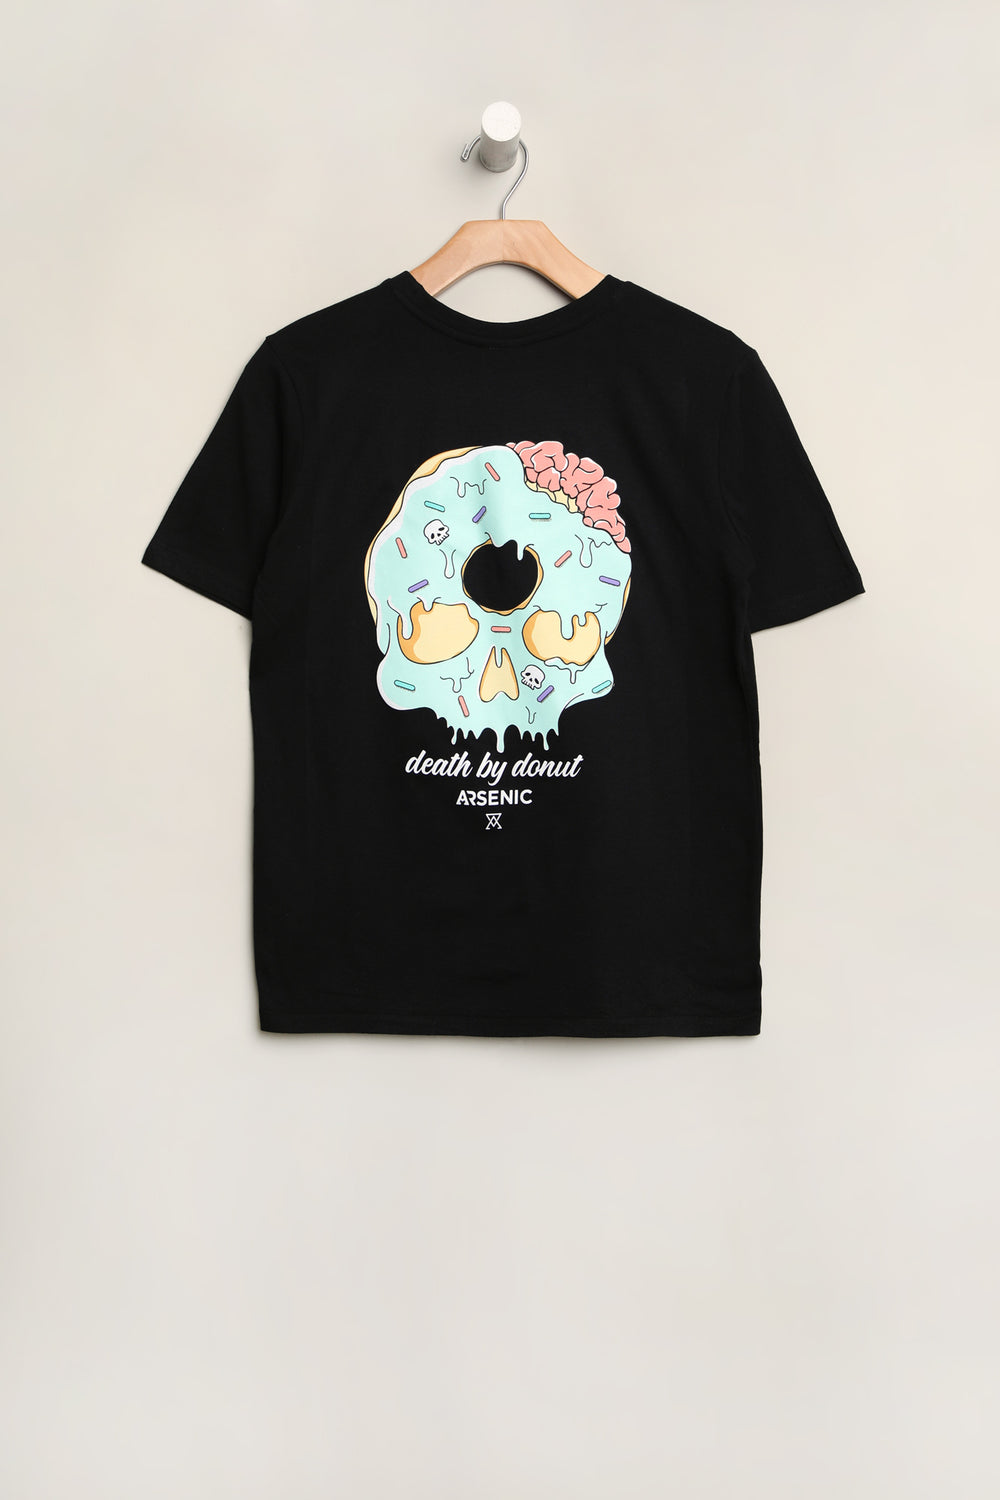 Arsenic Youth Death By Donut T-Shirt Arsenic Youth Death By Donut T-Shirt